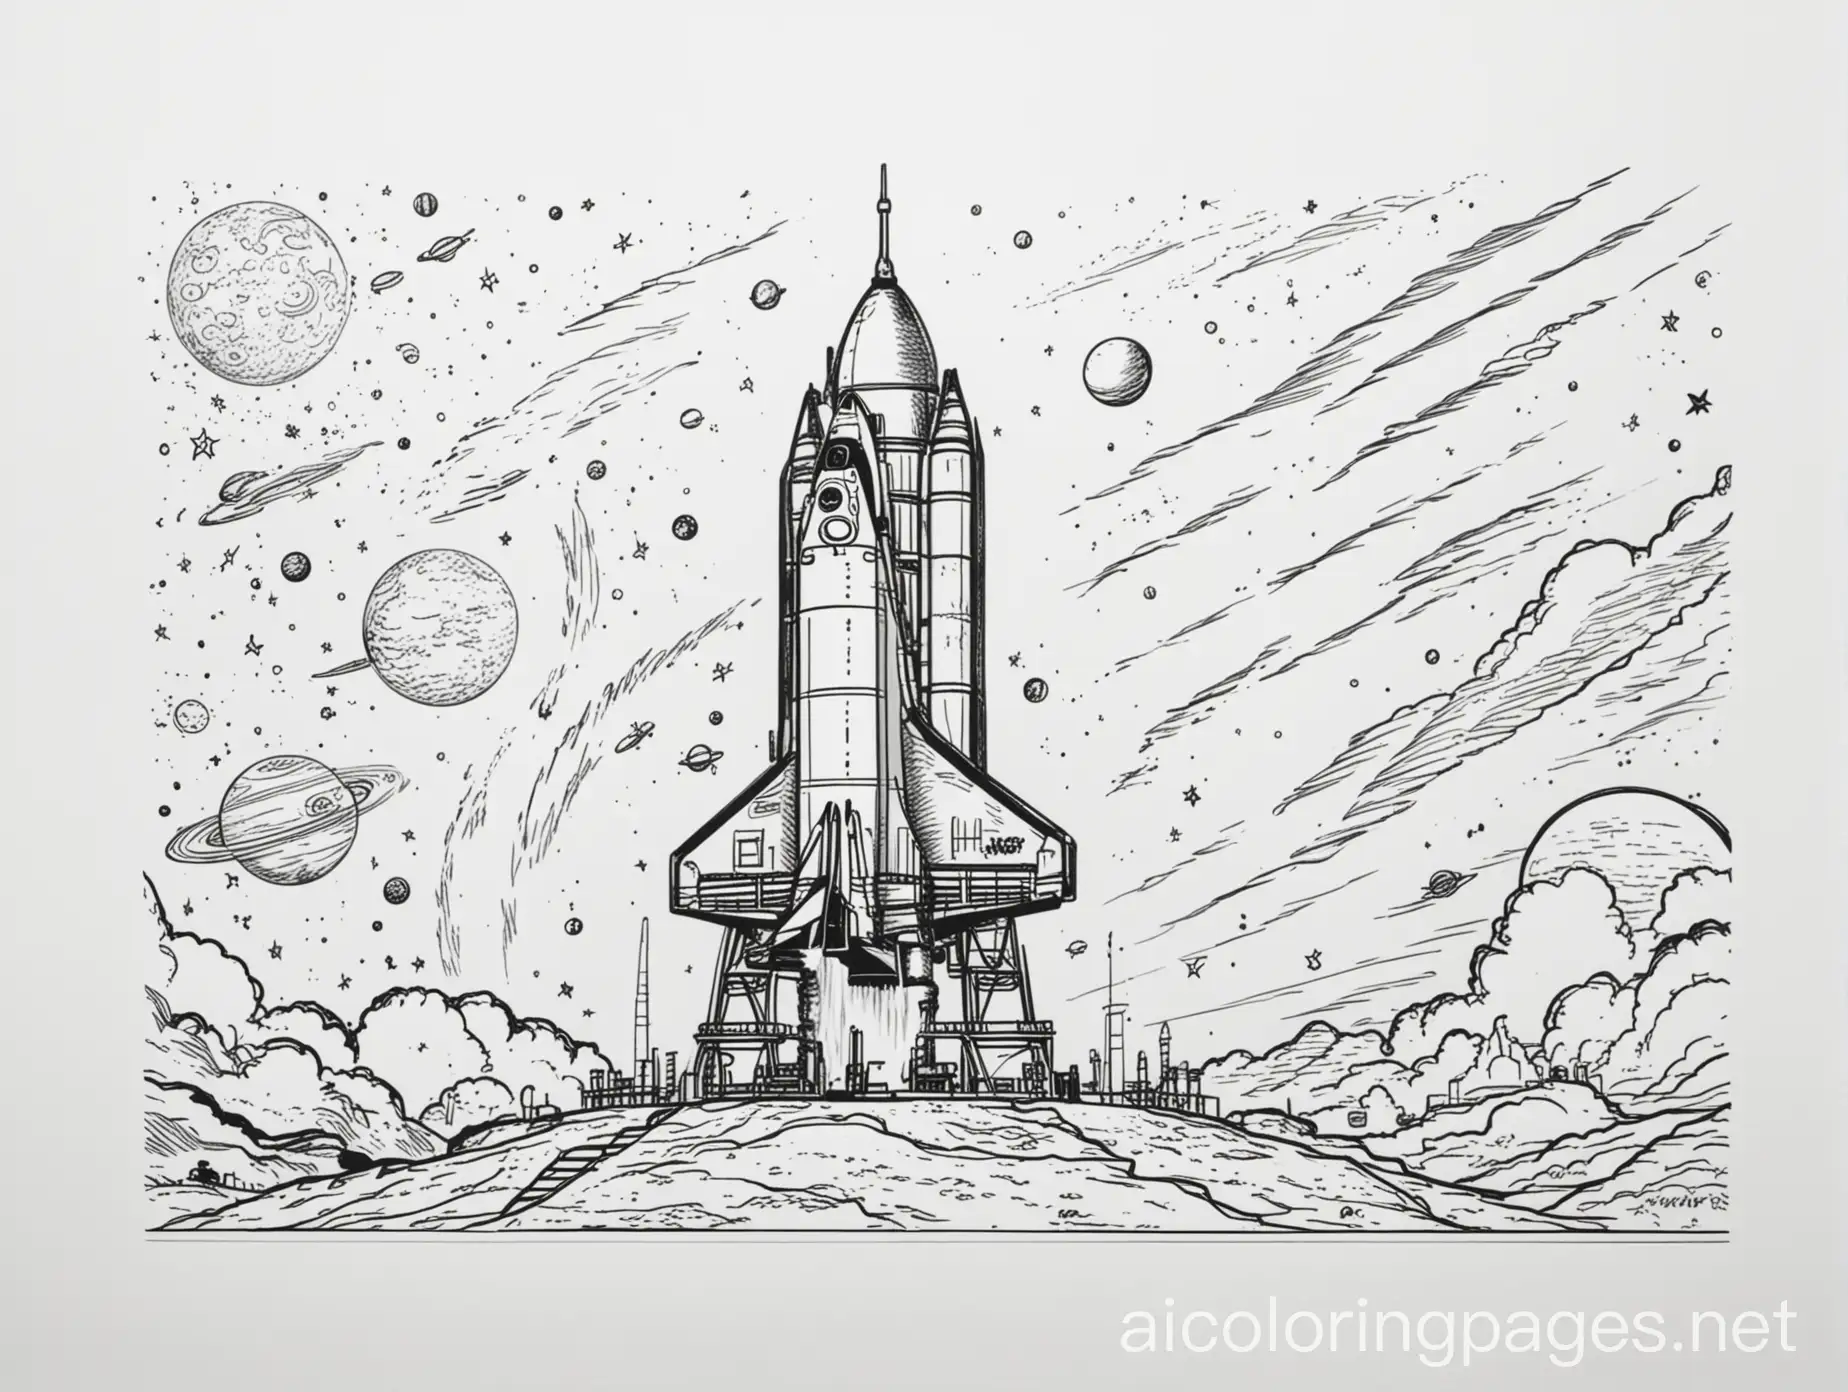 A rocket launch pad ready for lift-off, coloring page, black and white, line art, white background, Simplicity, Ample White Space. The background of the coloring page is plain white to make it easier for children to color within the lines. The outlines of all the subjects are easy to distinguish, making it simple for kids to color without too much difficulty. There should be planets on the background to color. Background should be similar to white paper.